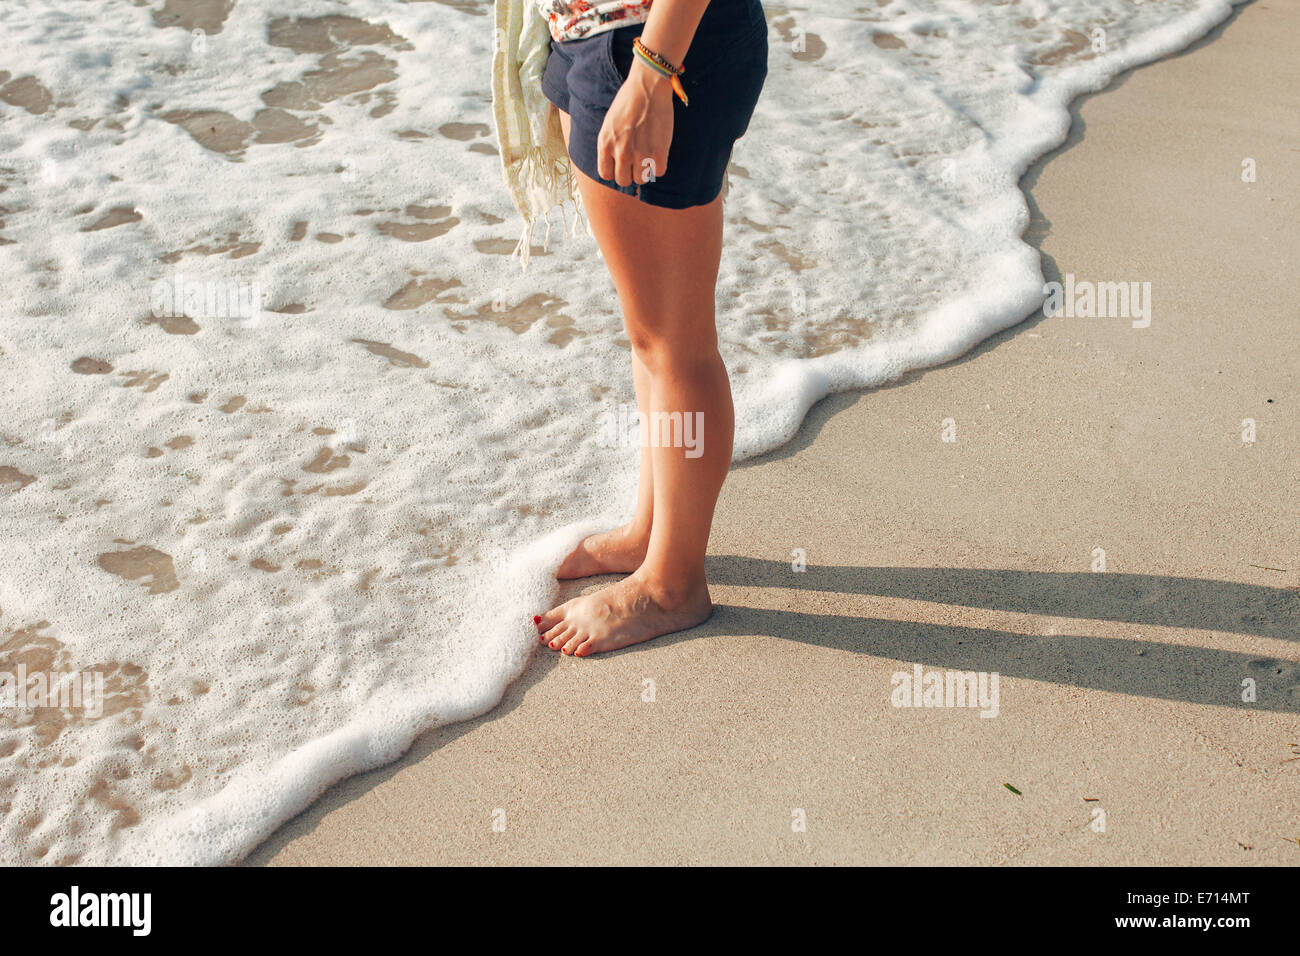 Indonesia, Gili Islands, woman standing on the beach, partial view Stock Photo